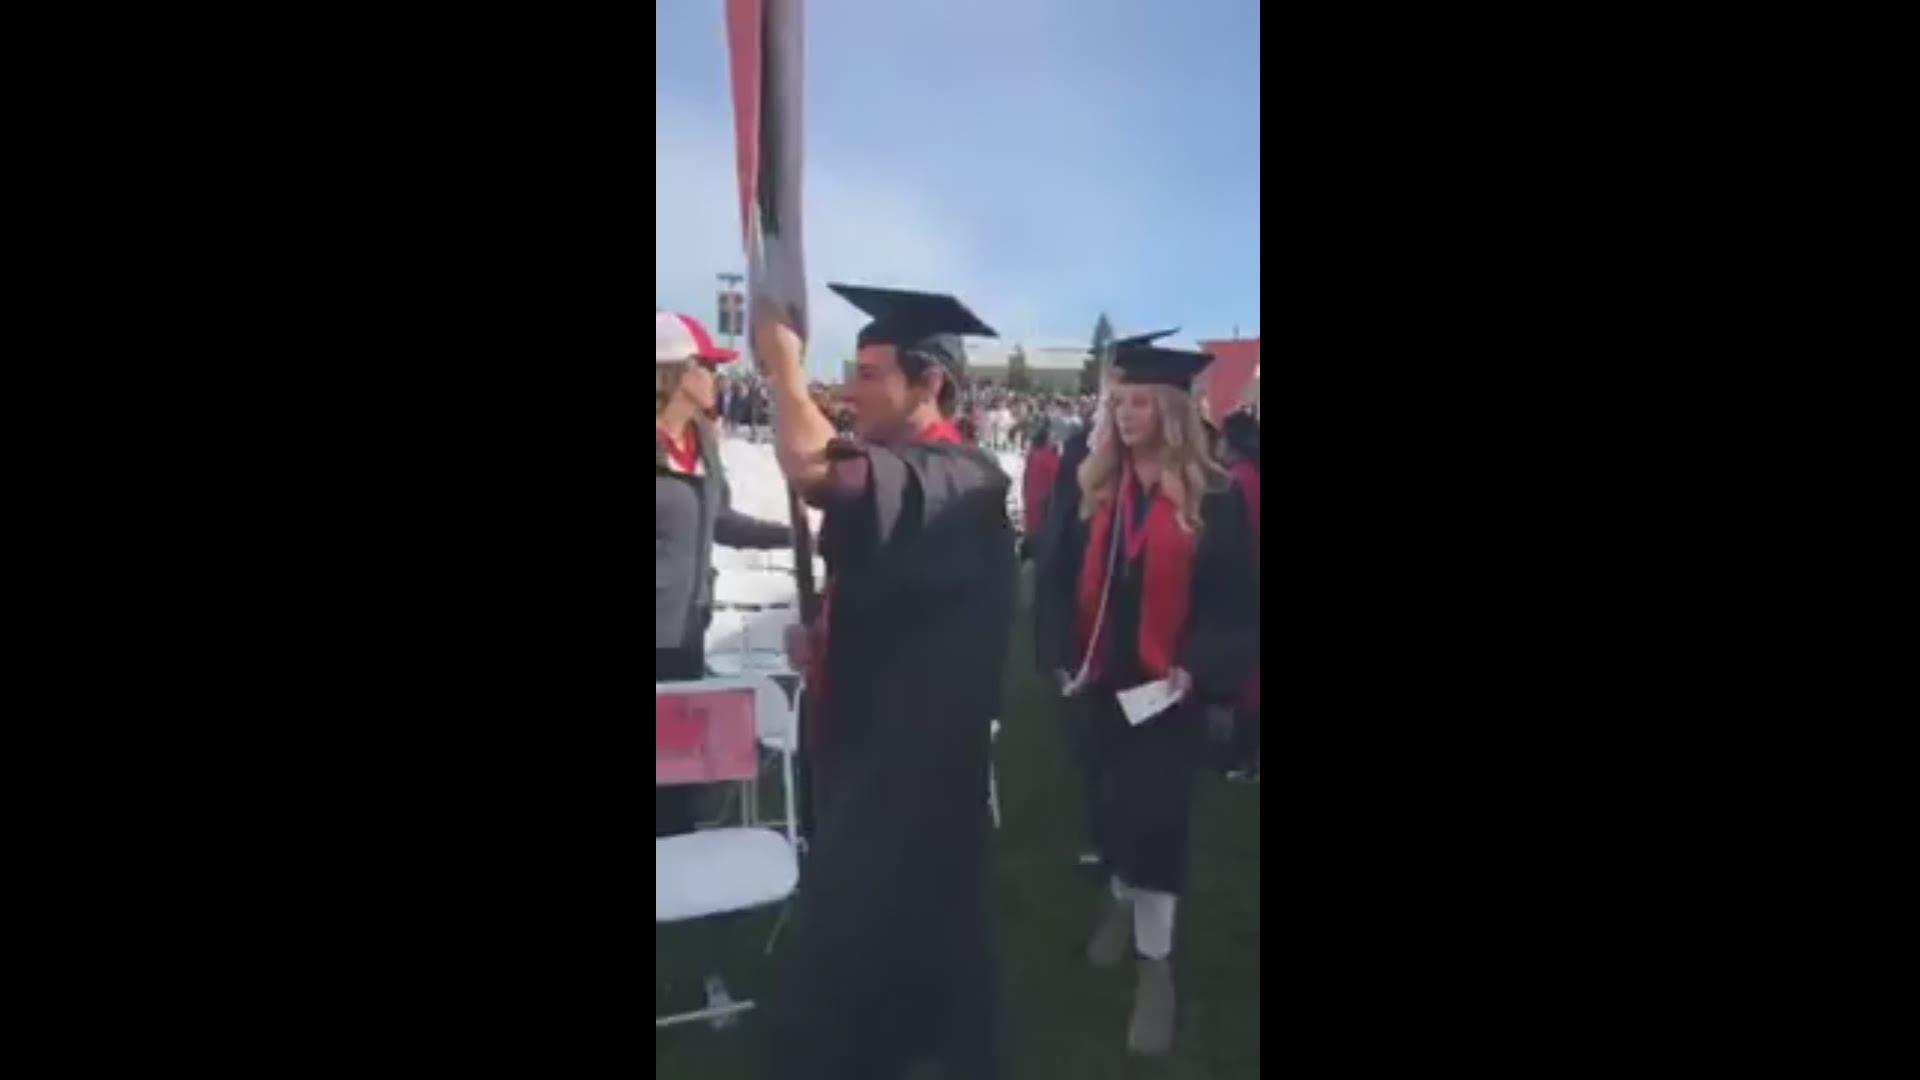 2019: The largest-ever graduating class from Stanislaus State University! The school's new graduating class record is 3,562 students, 125 students more than last year! Lena Howland shared the excitement in a Facebook live.